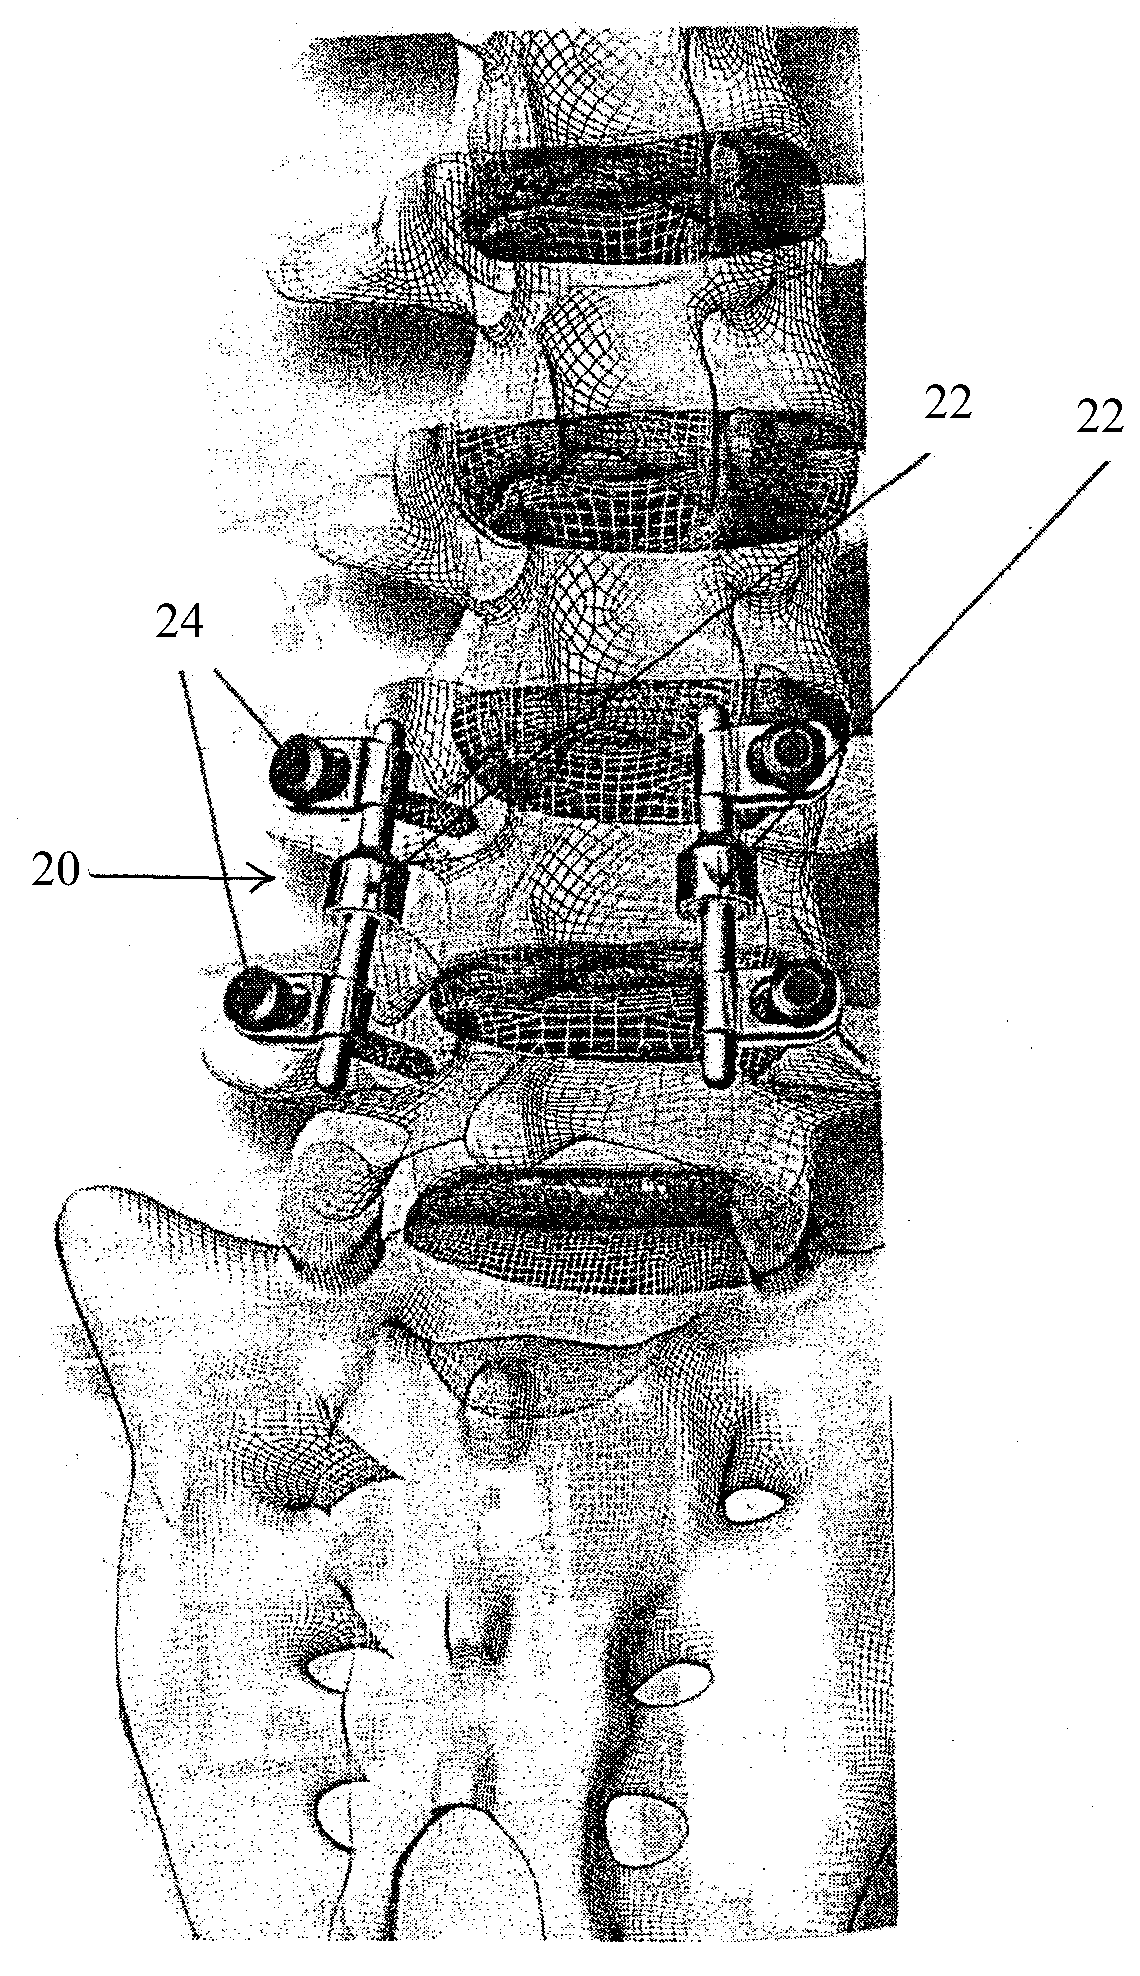 Spinal implant having a post-operative adjustable dimension